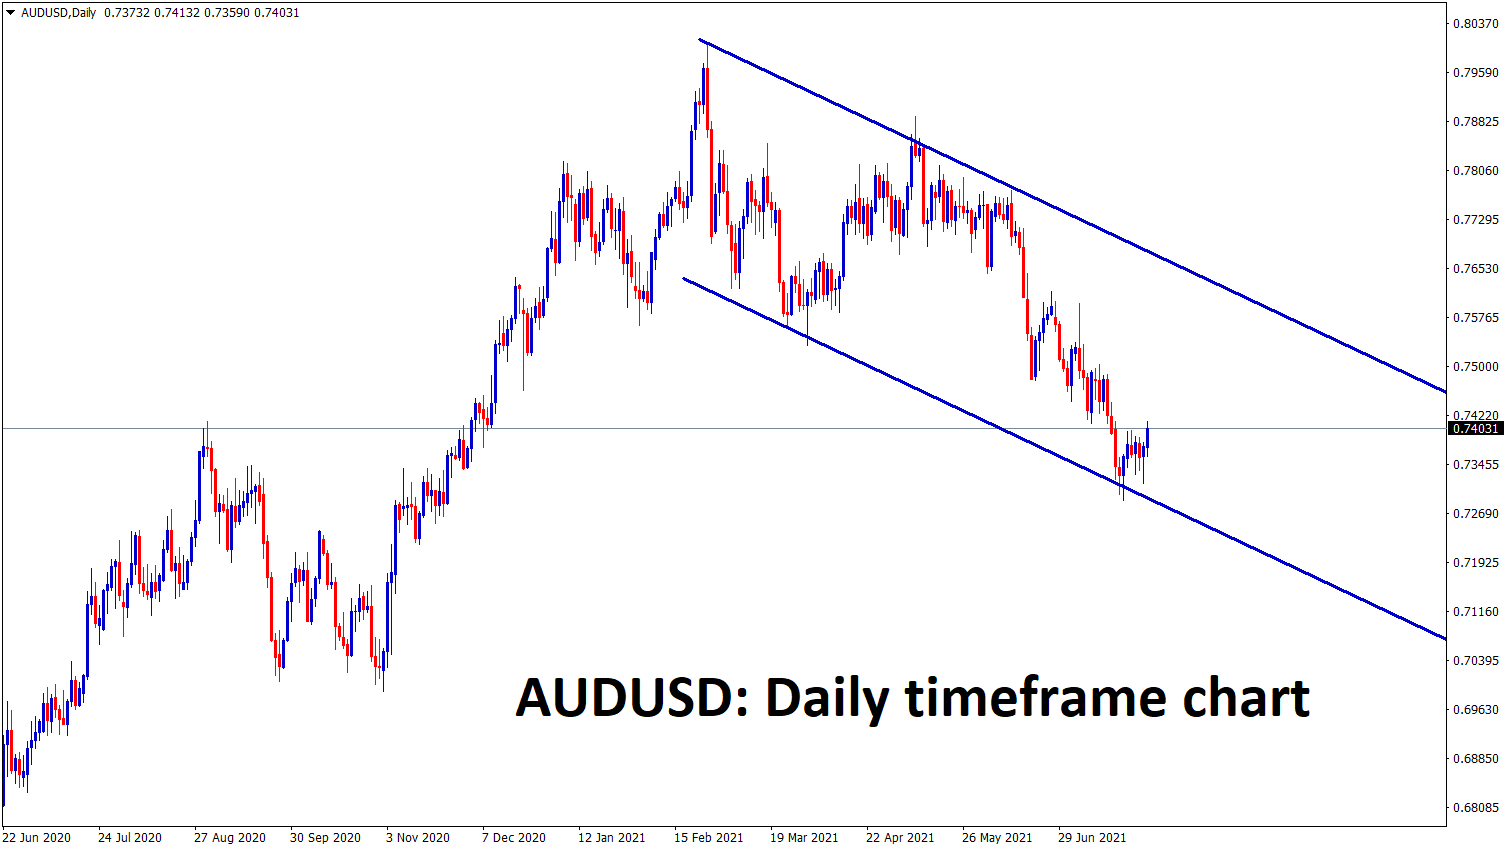 AUDUSD bouncing back from the lower low level of descending channel